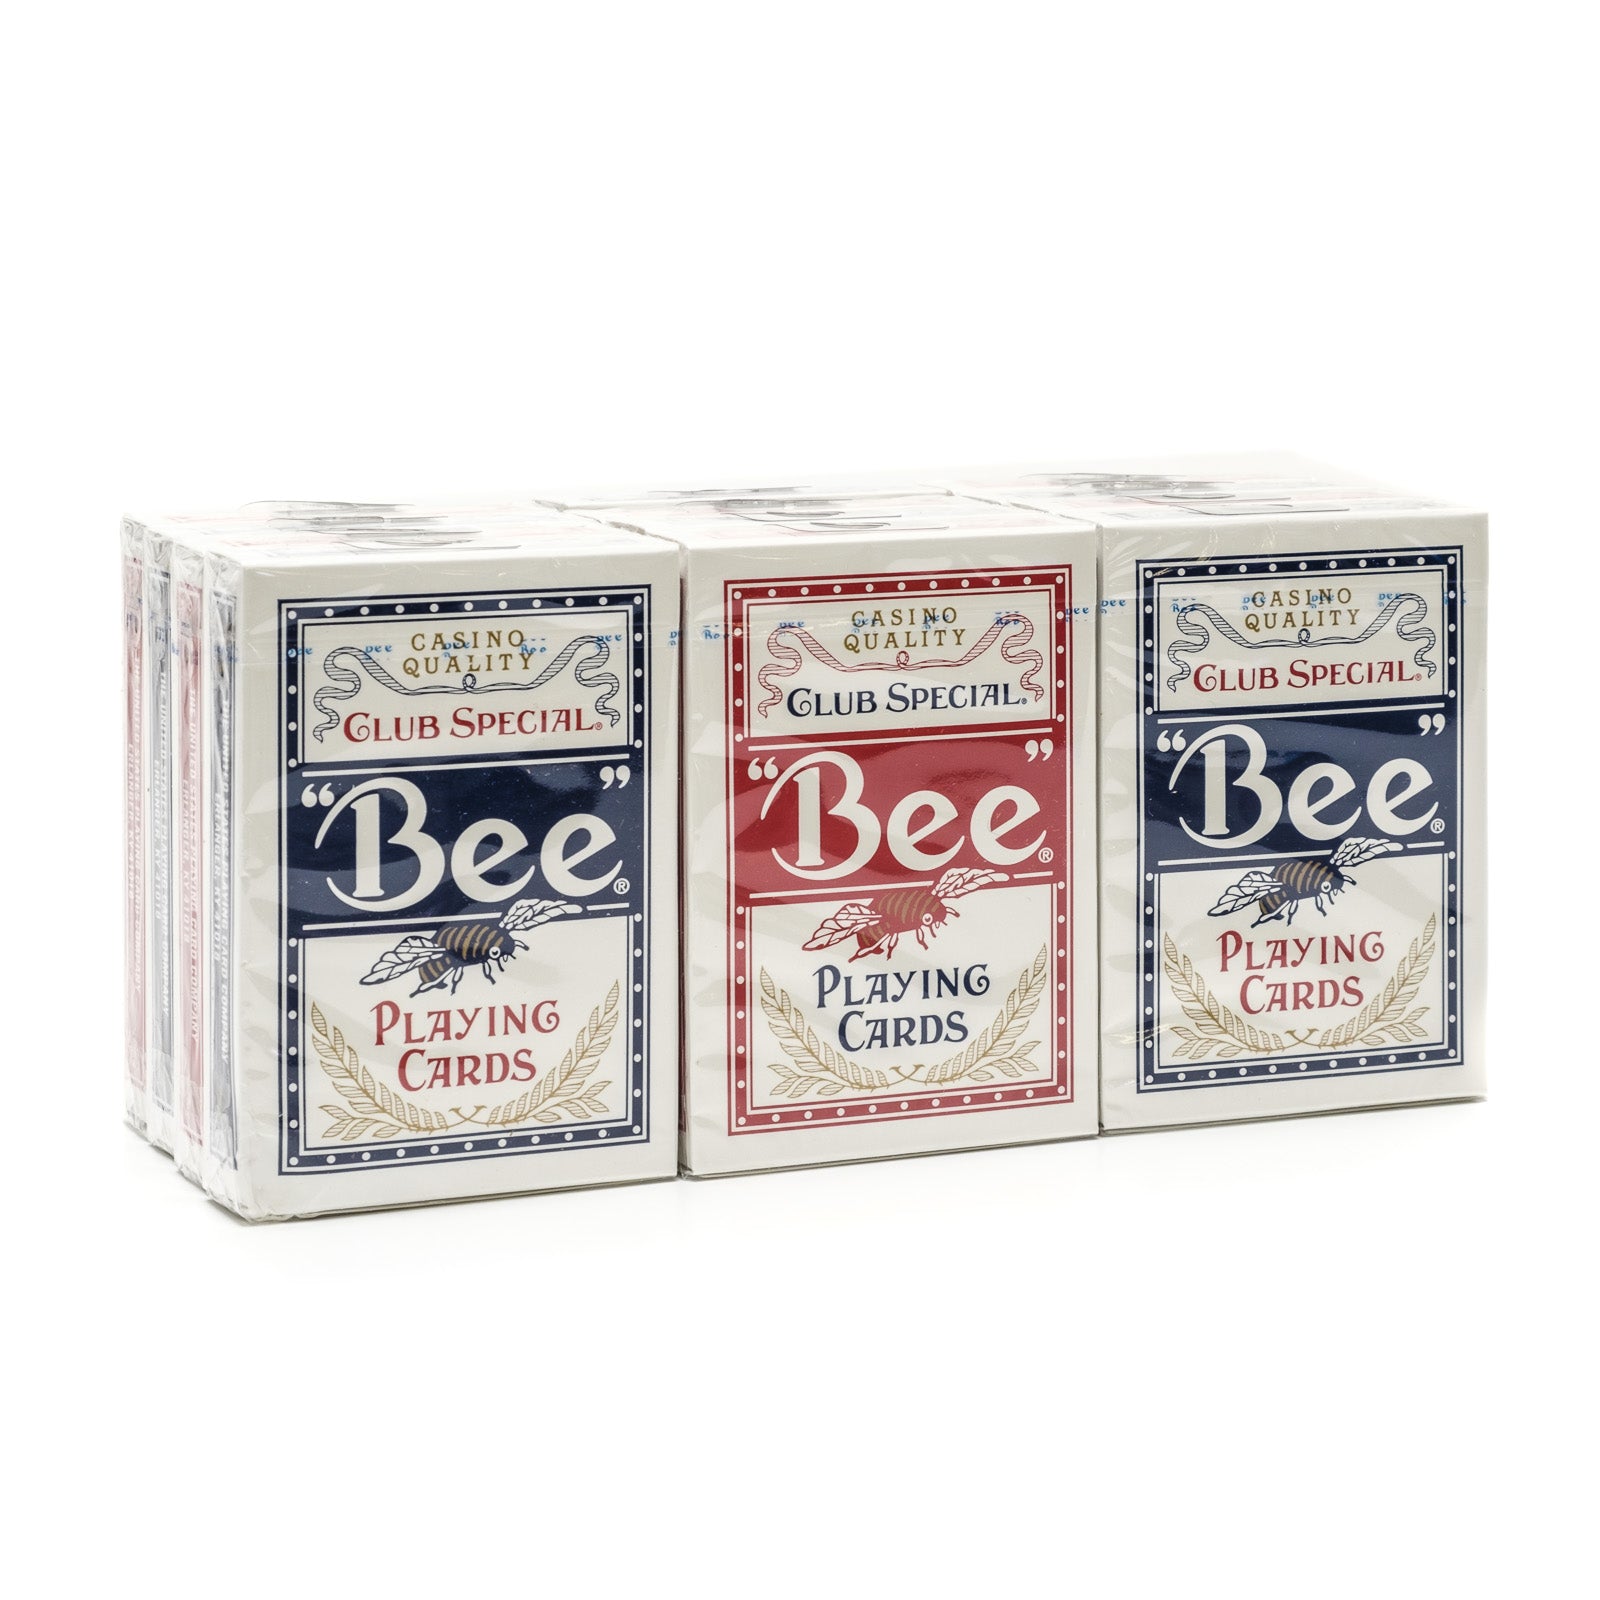 Bee 92 Club Special Standard Index Playing Cards (Per Dozen)